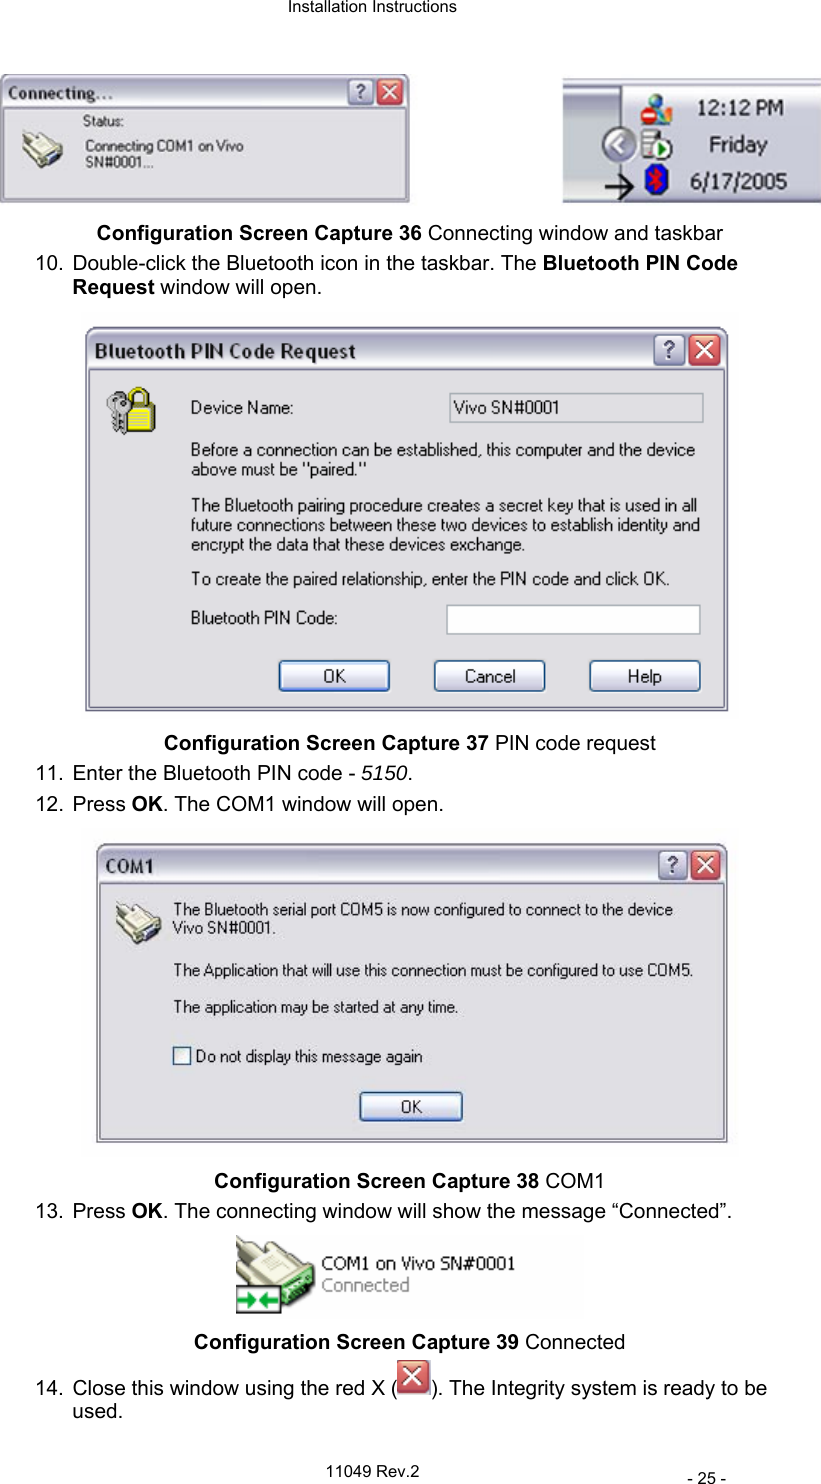  Installation Instructions   11049 Rev.2     - 25 -  Configuration Screen Capture 36 Connecting window and taskbar 10.  Double-click the Bluetooth icon in the taskbar. The Bluetooth PIN Code Request window will open.  Configuration Screen Capture 37 PIN code request 11.  Enter the Bluetooth PIN code - 5150.  12. Press OK. The COM1 window will open.  Configuration Screen Capture 38 COM1 13. Press OK. The connecting window will show the message “Connected”.  Configuration Screen Capture 39 Connected 14.  Close this window using the red X ( ). The Integrity system is ready to be used. 